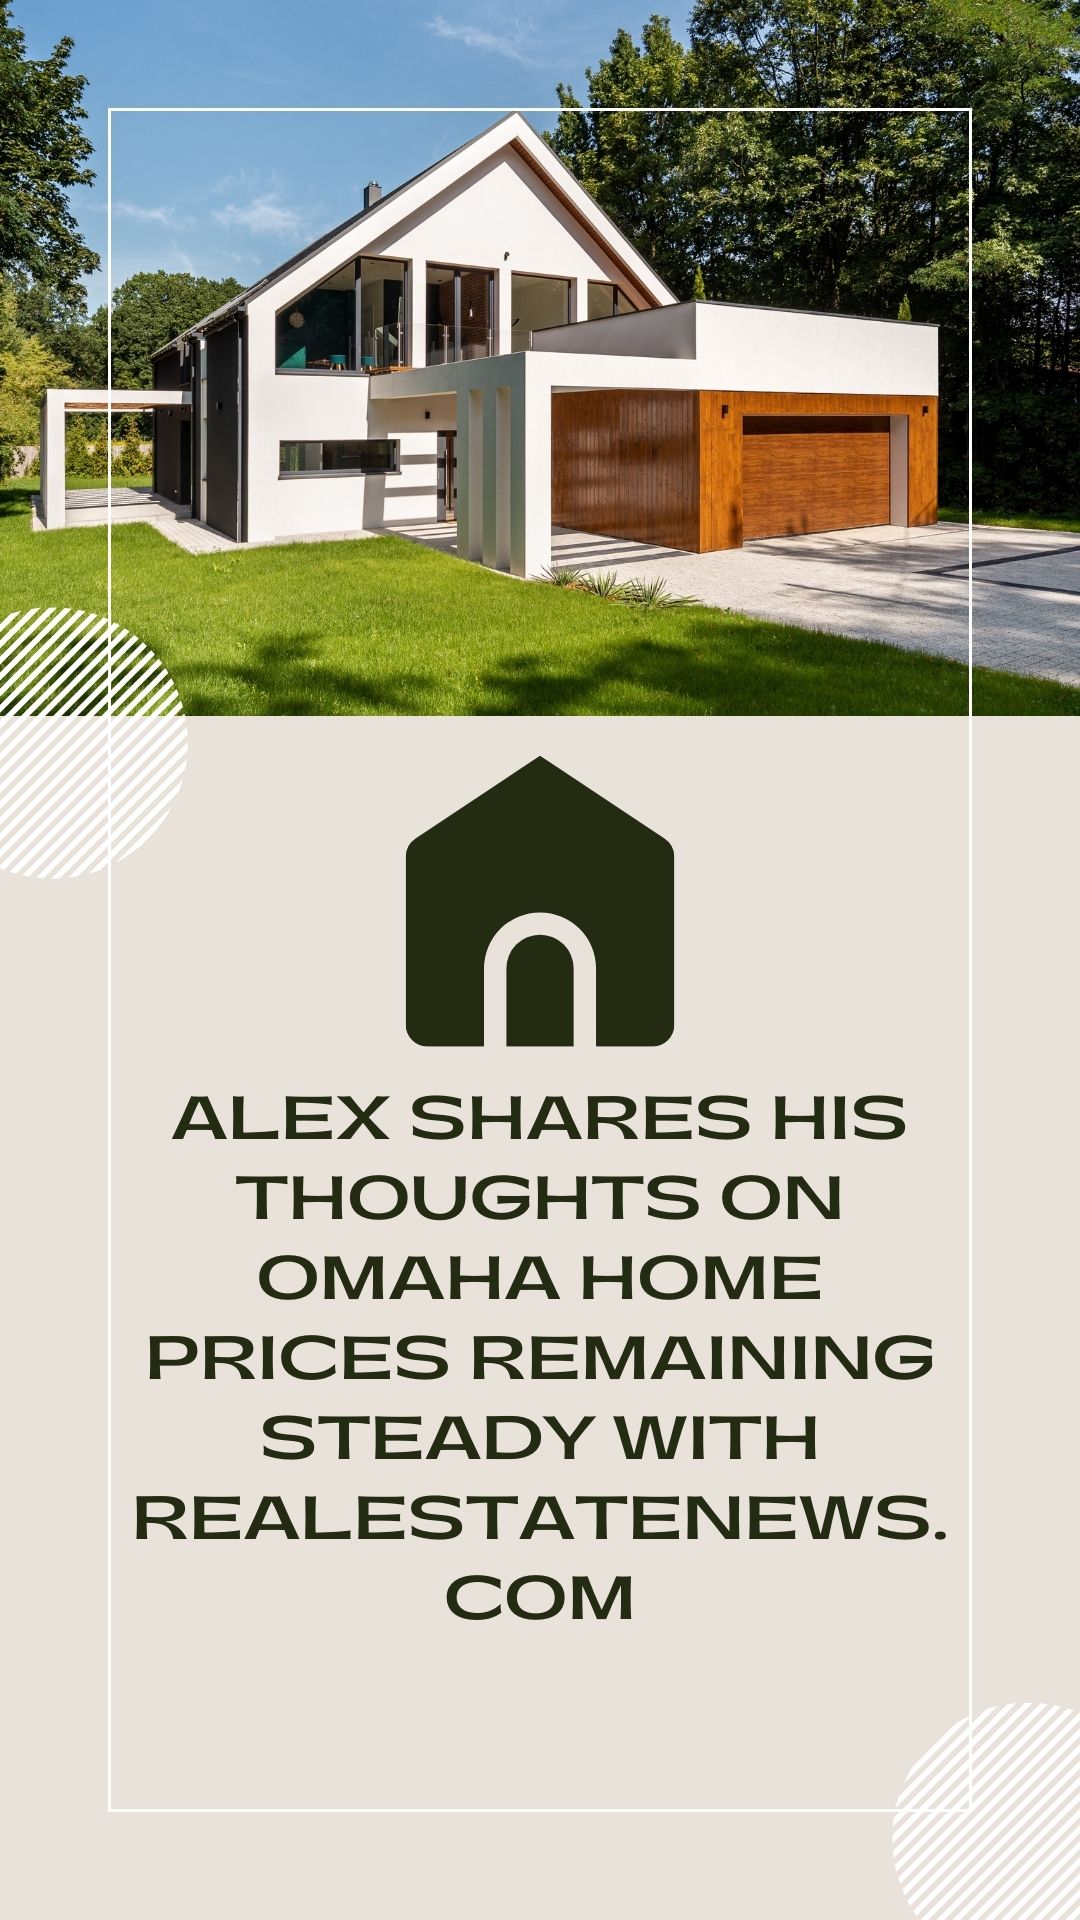 Alex Shares His Thoughts on Omaha Home Prices Remaining Steady with RealEstateNews.com